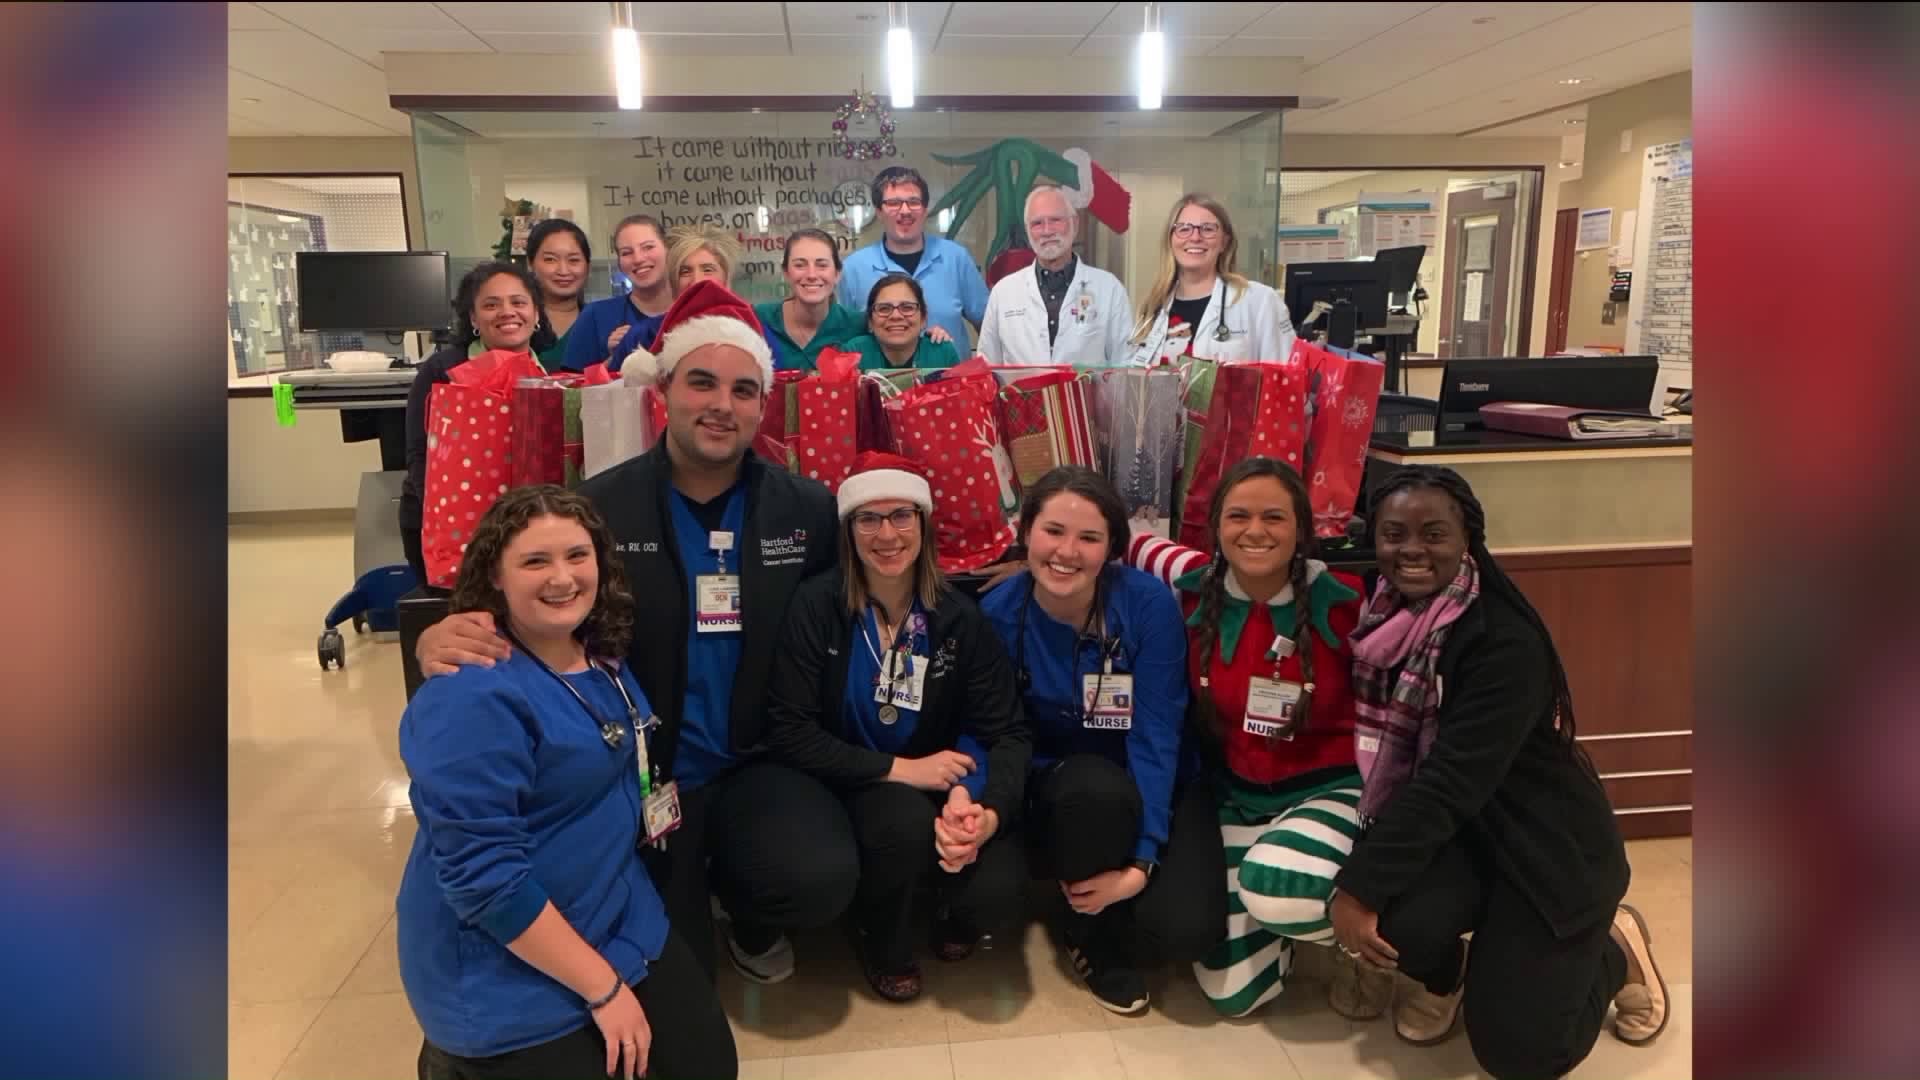 Hartford Hospital patients have Christmas brightened by staff